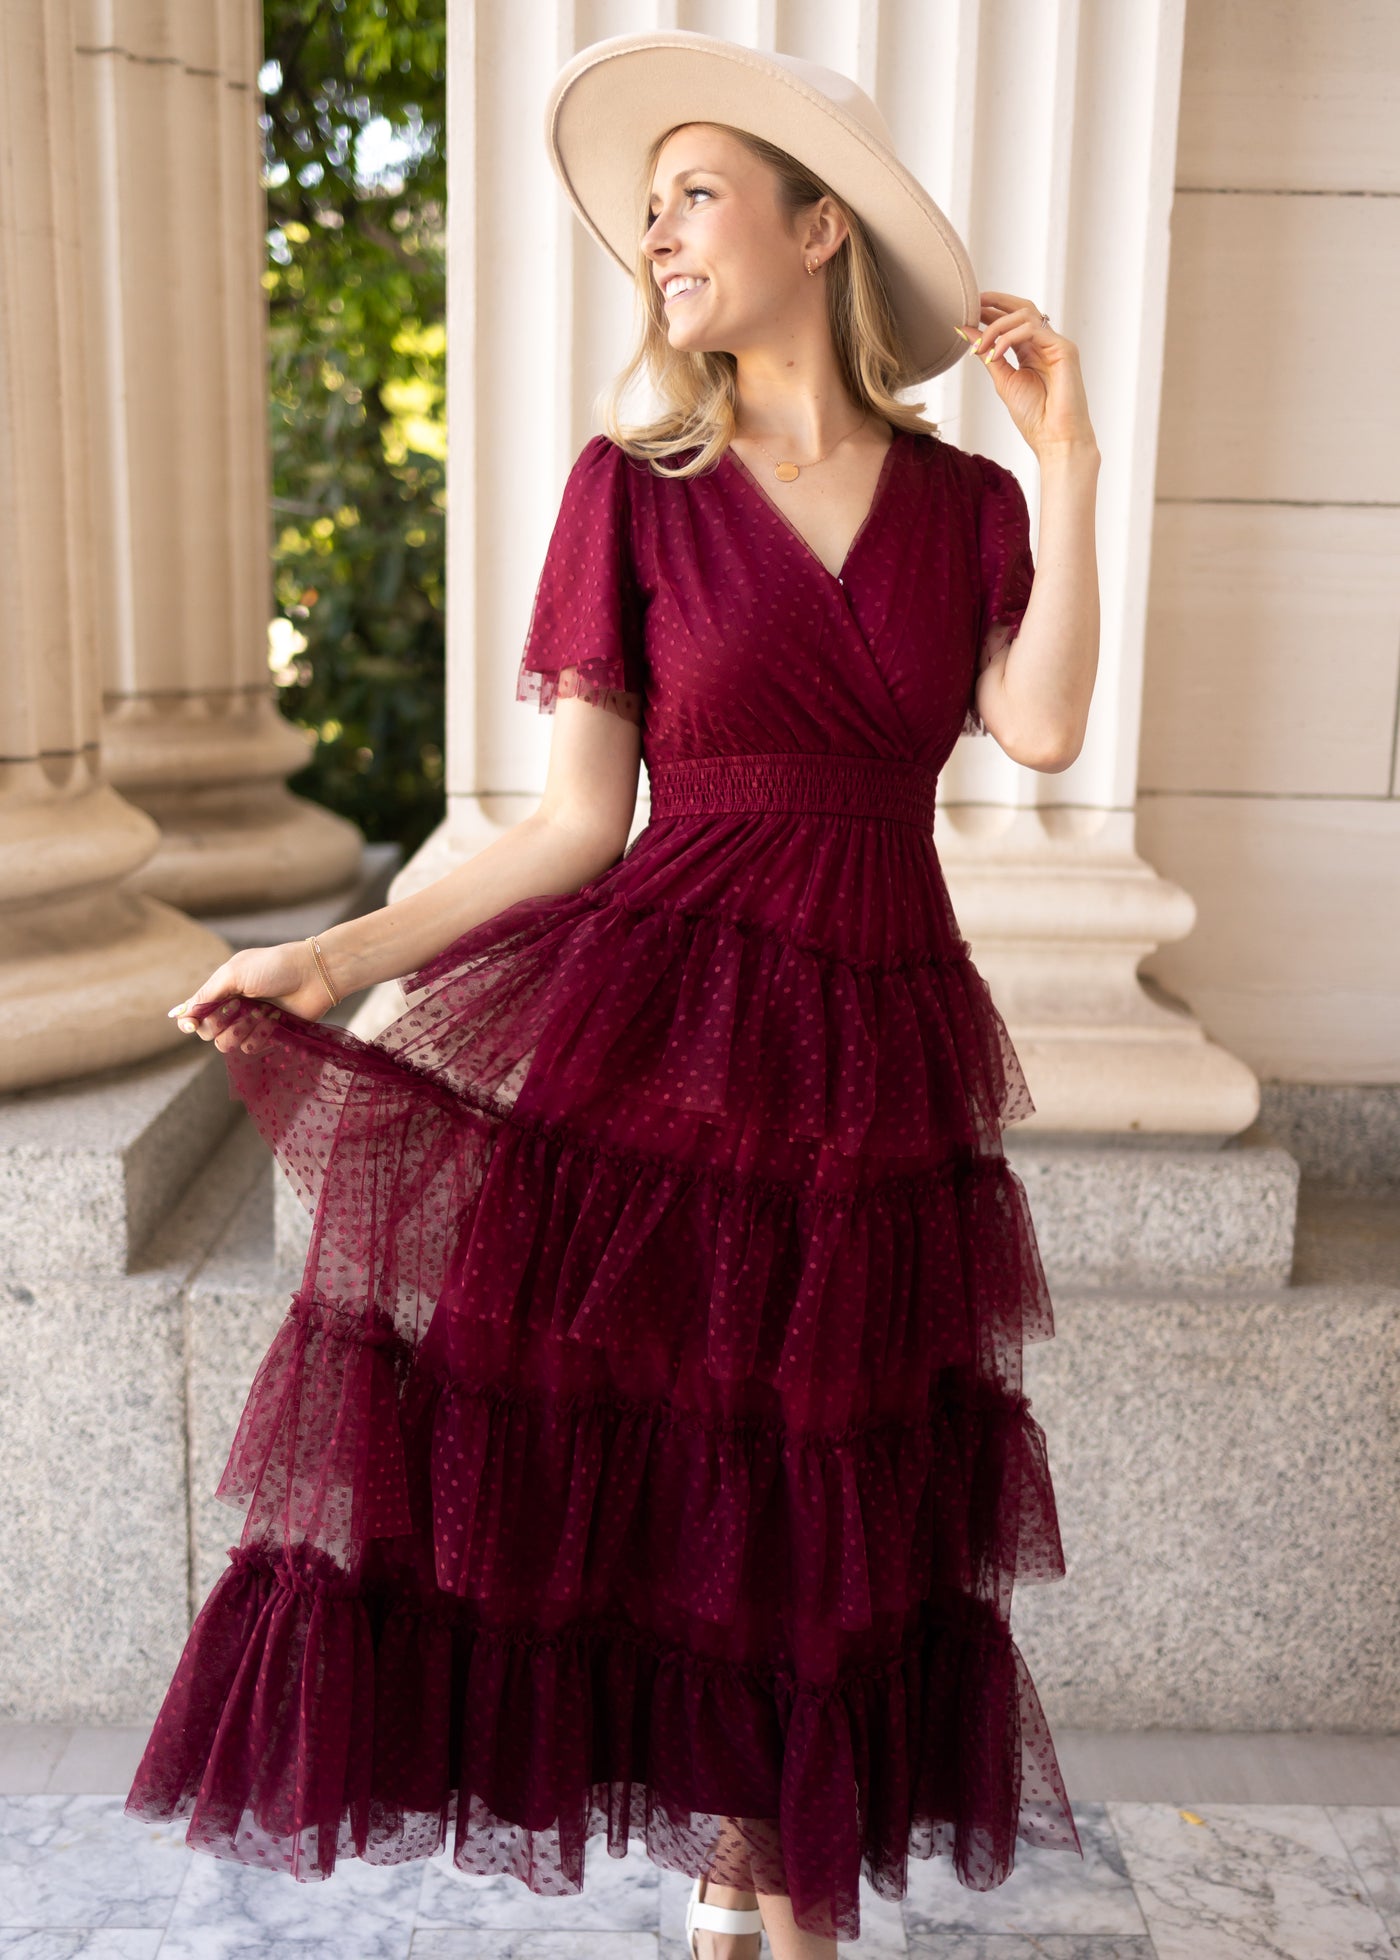 Burgundy dress with a ruffle skirt and short sleeves